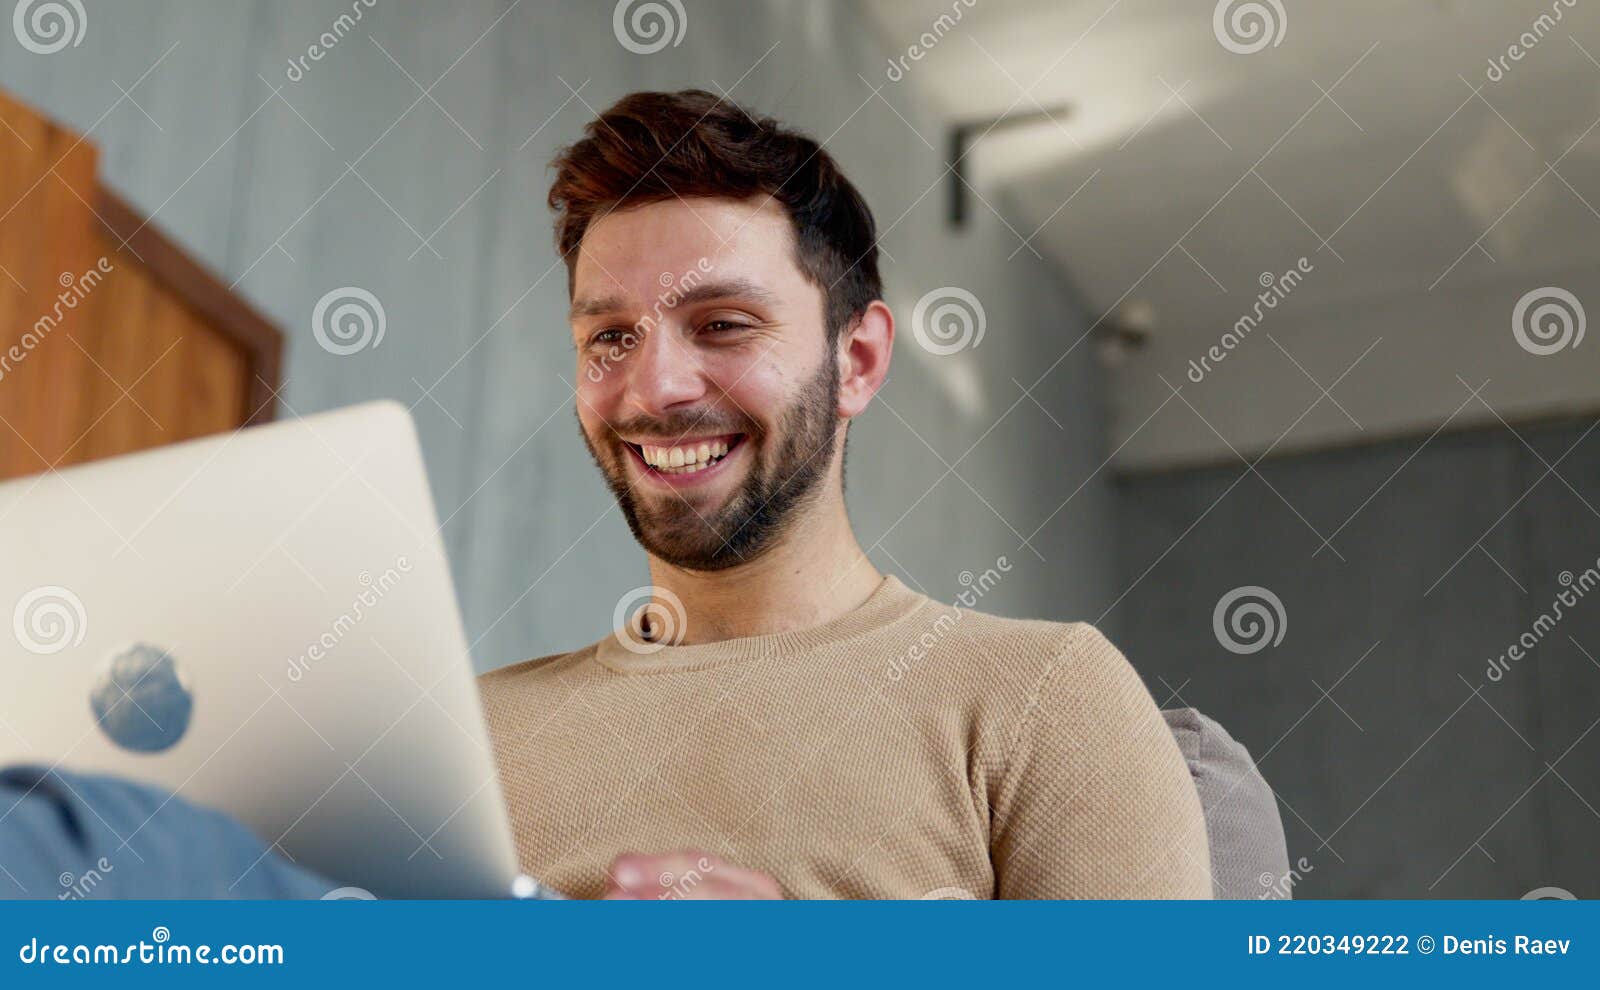 young smiling man communicating by videoconference